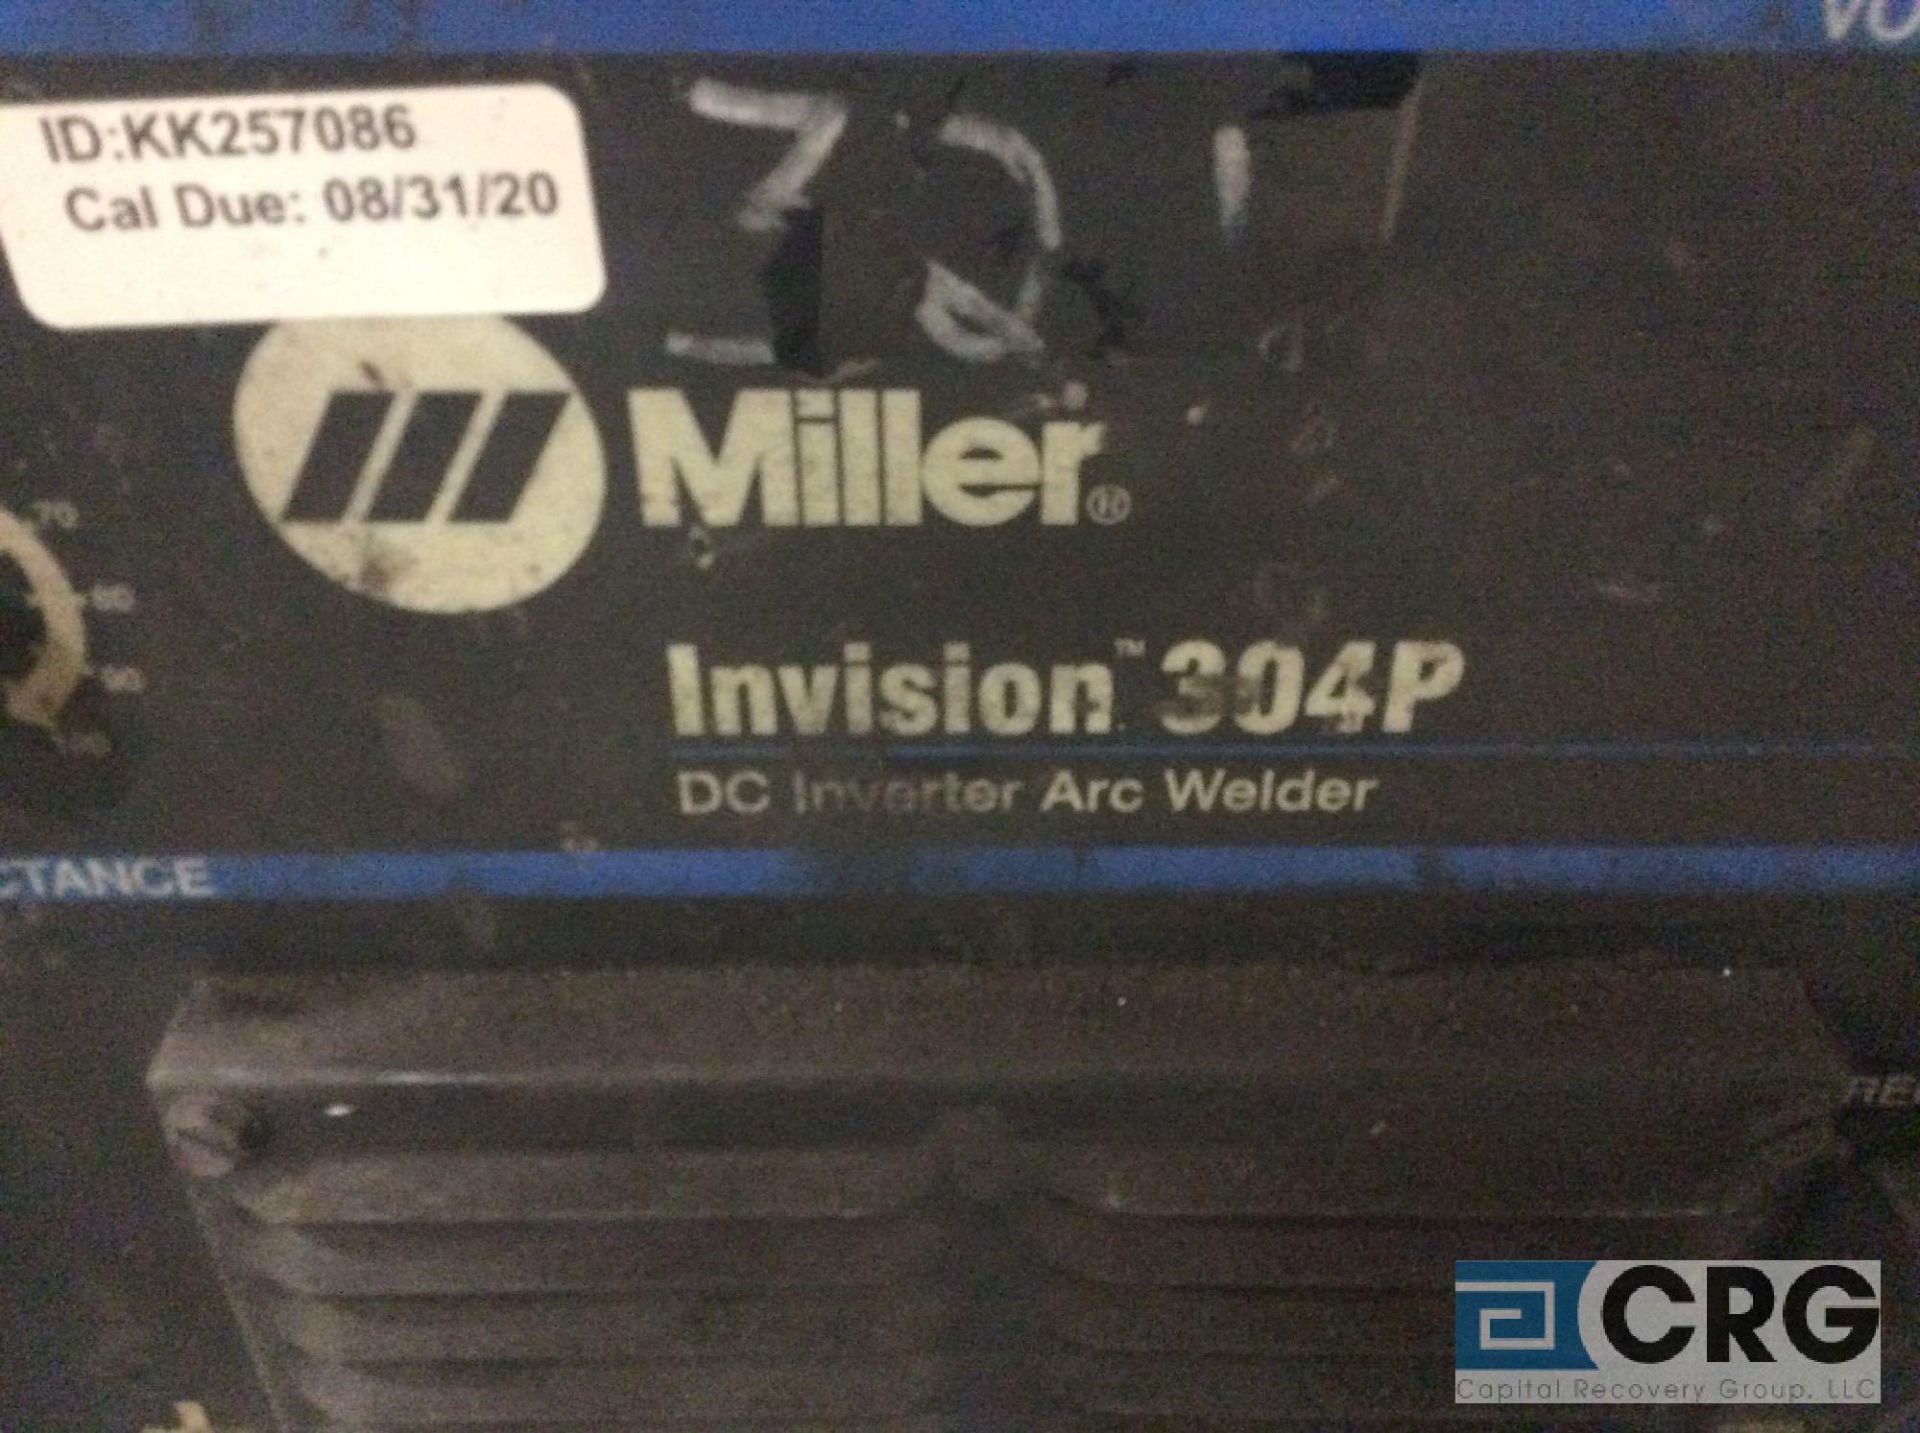 Miller INVISION 304P DC inverter arc welder, 95 max OCV, 3 phase, With 24V wire feed - Image 2 of 4